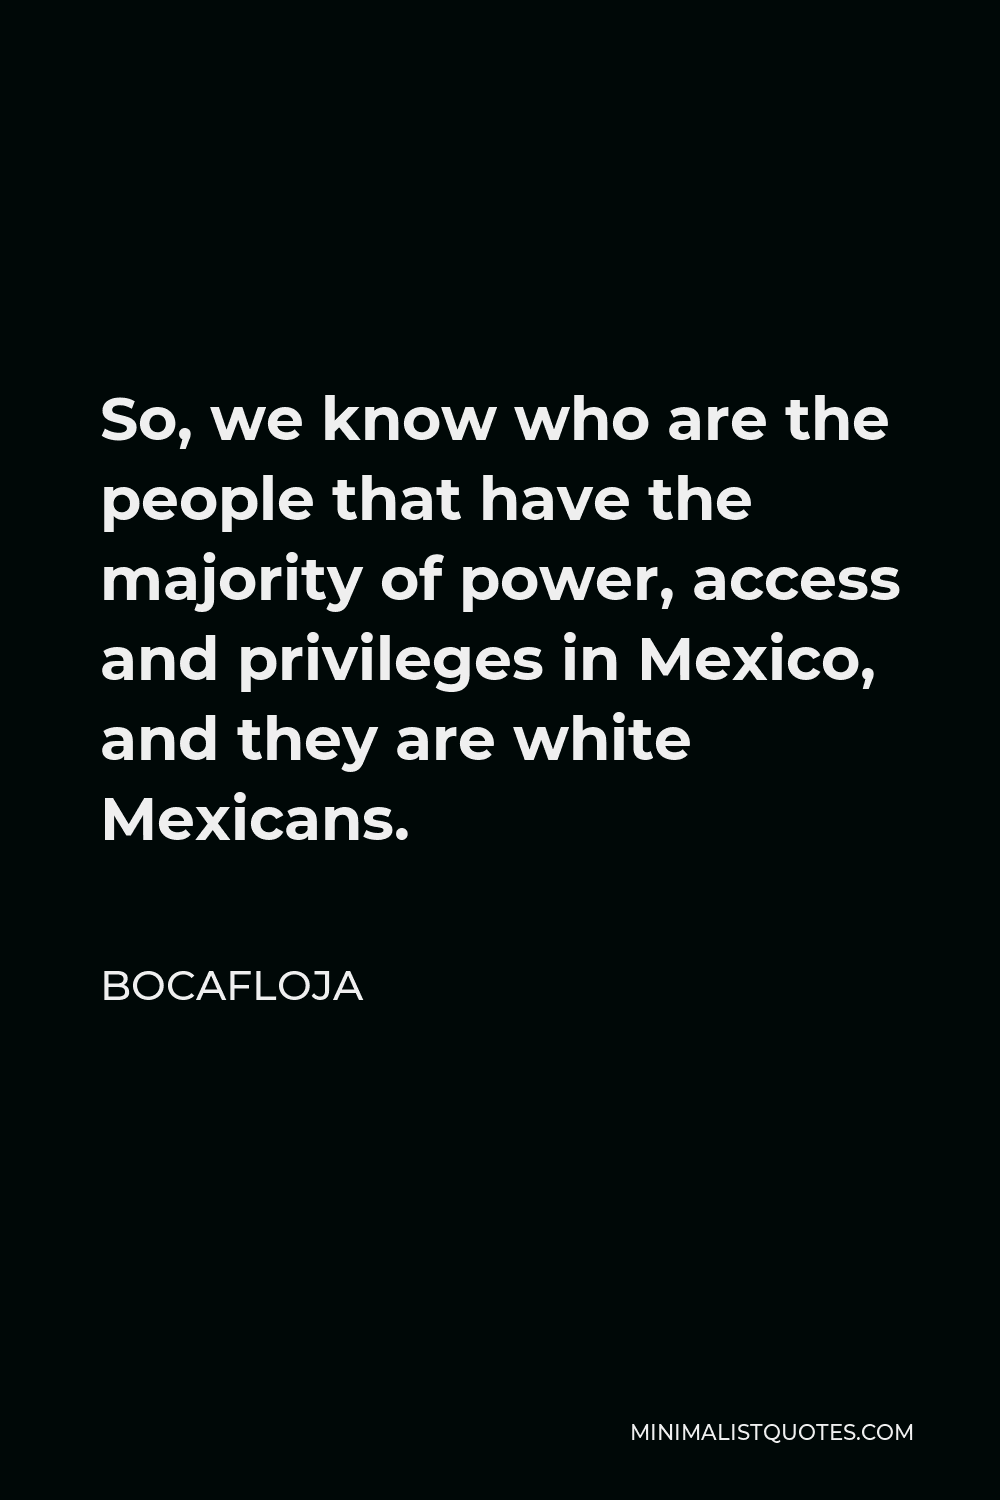 Bocafloja Quote - So, we know who are the people that have the majority of power, access and privileges in Mexico, and they are white Mexicans.